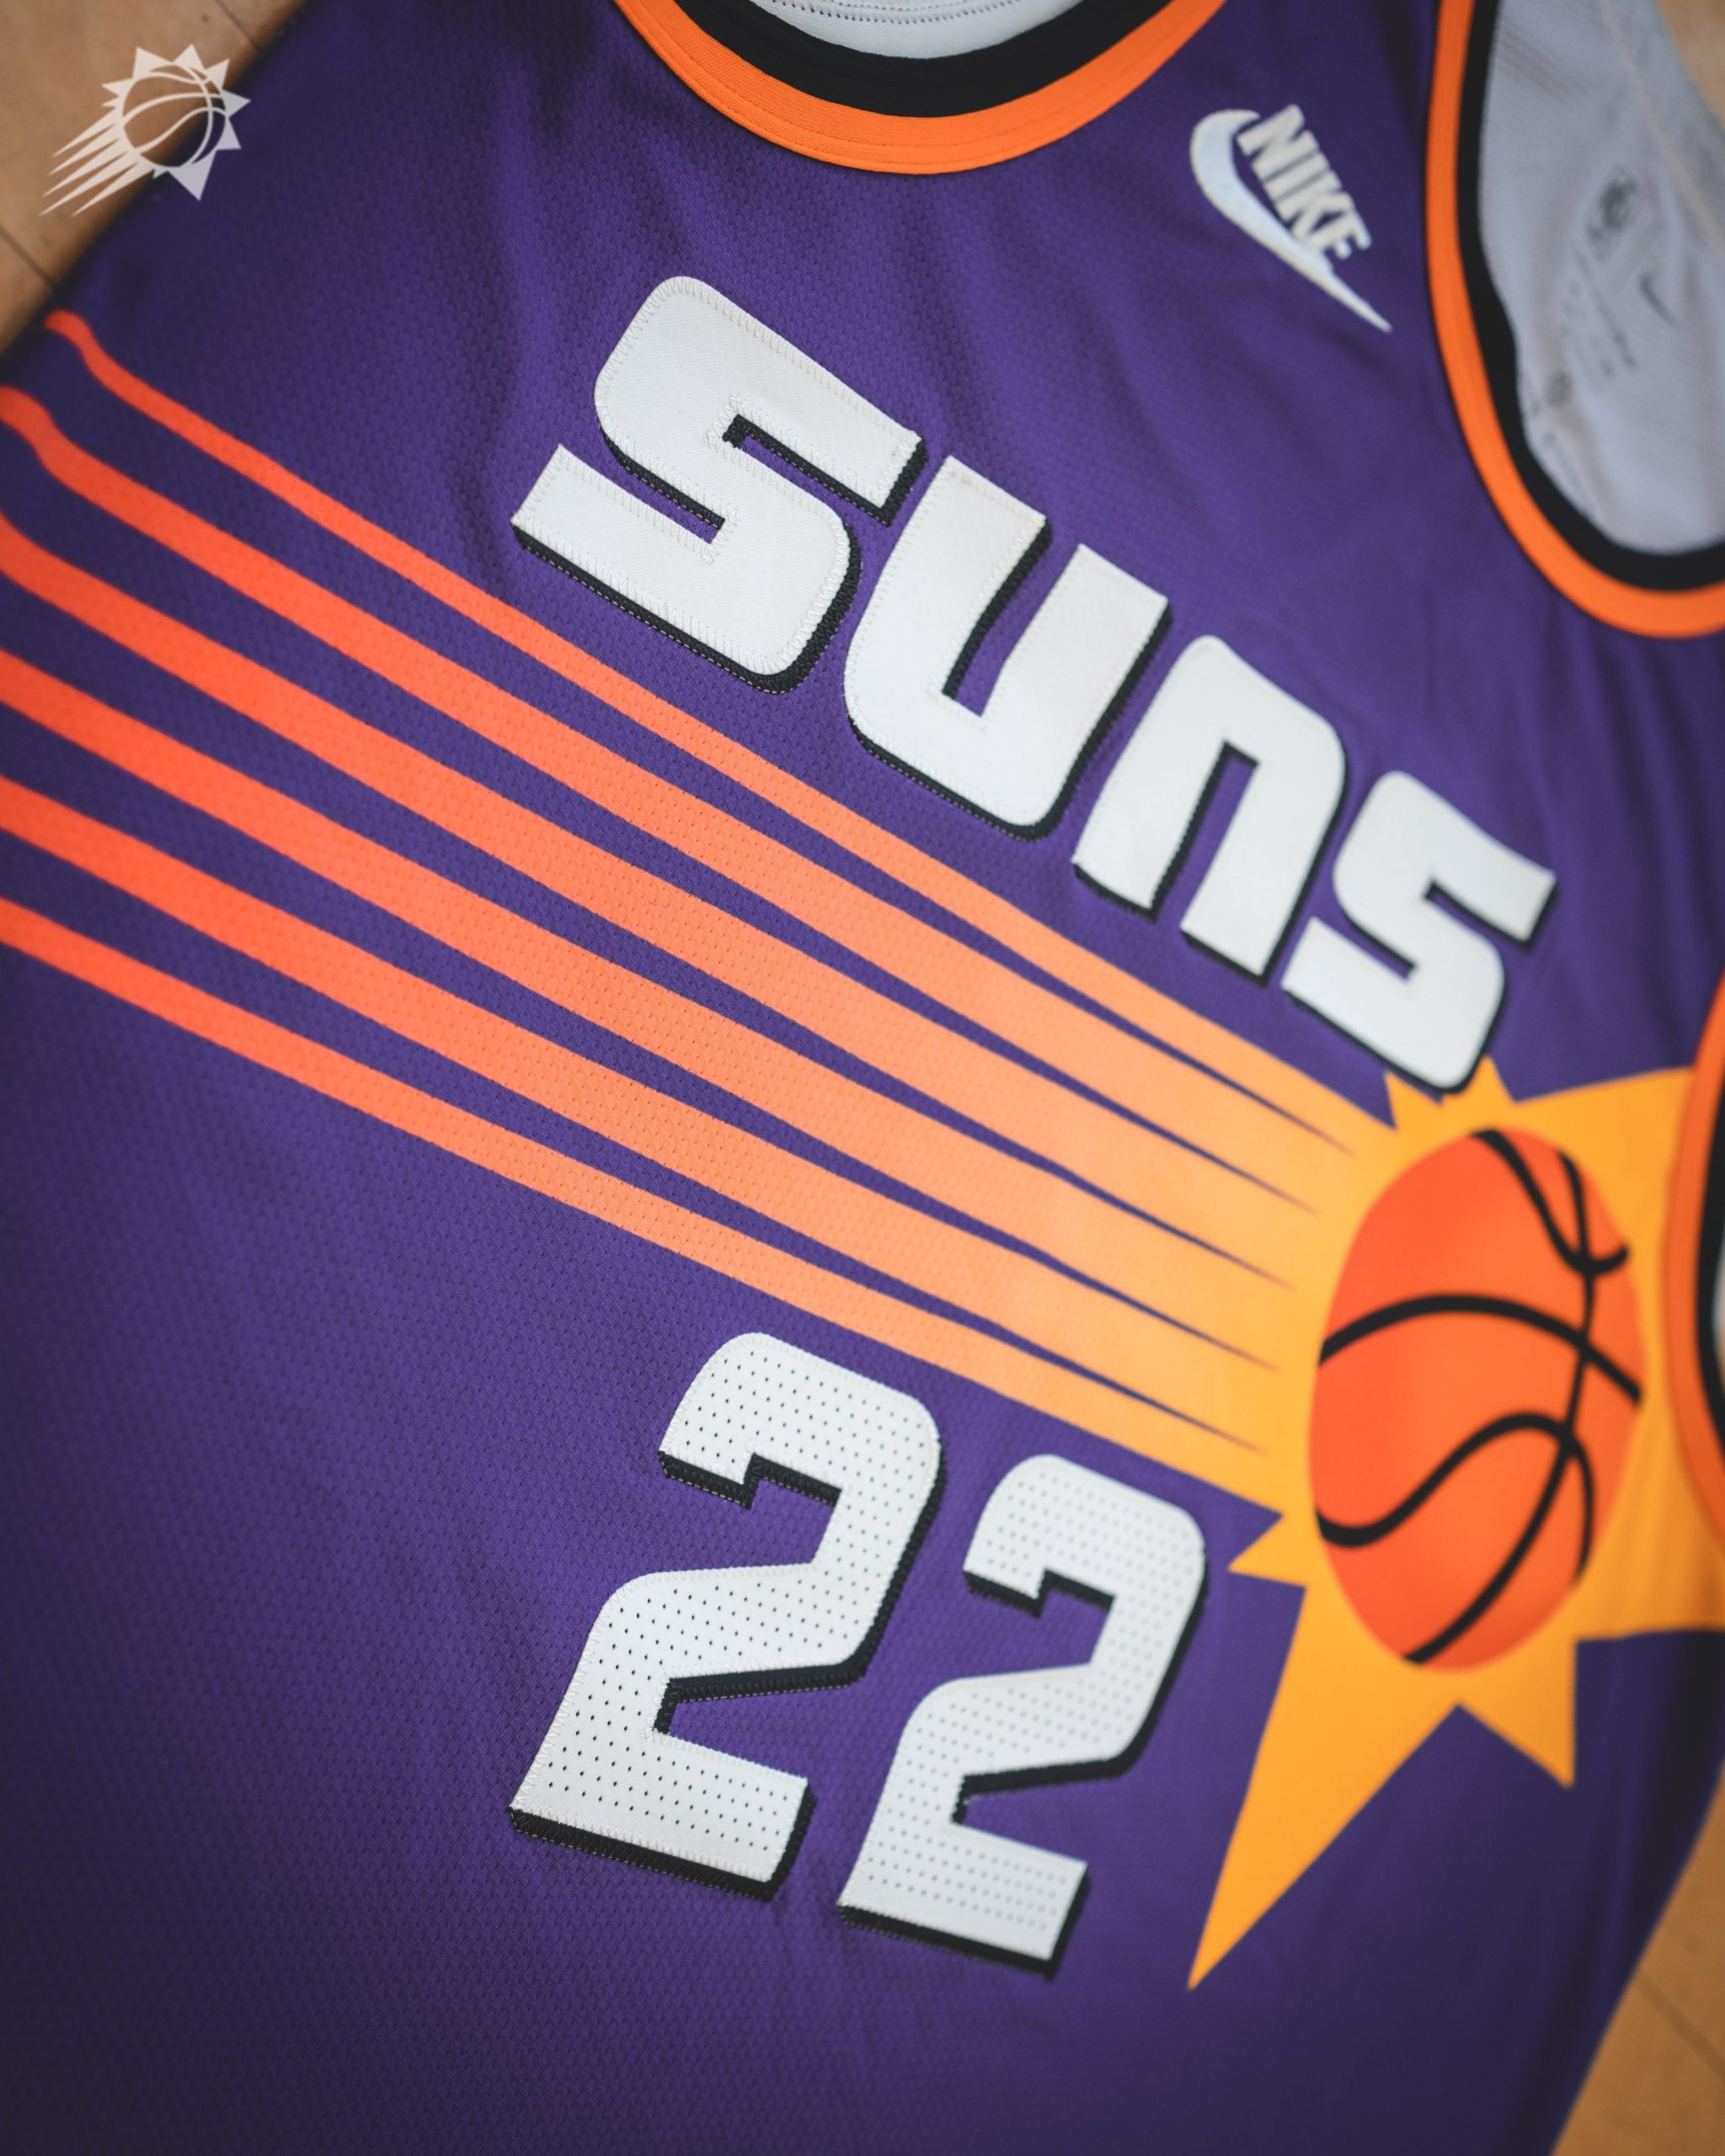 old suns jersey